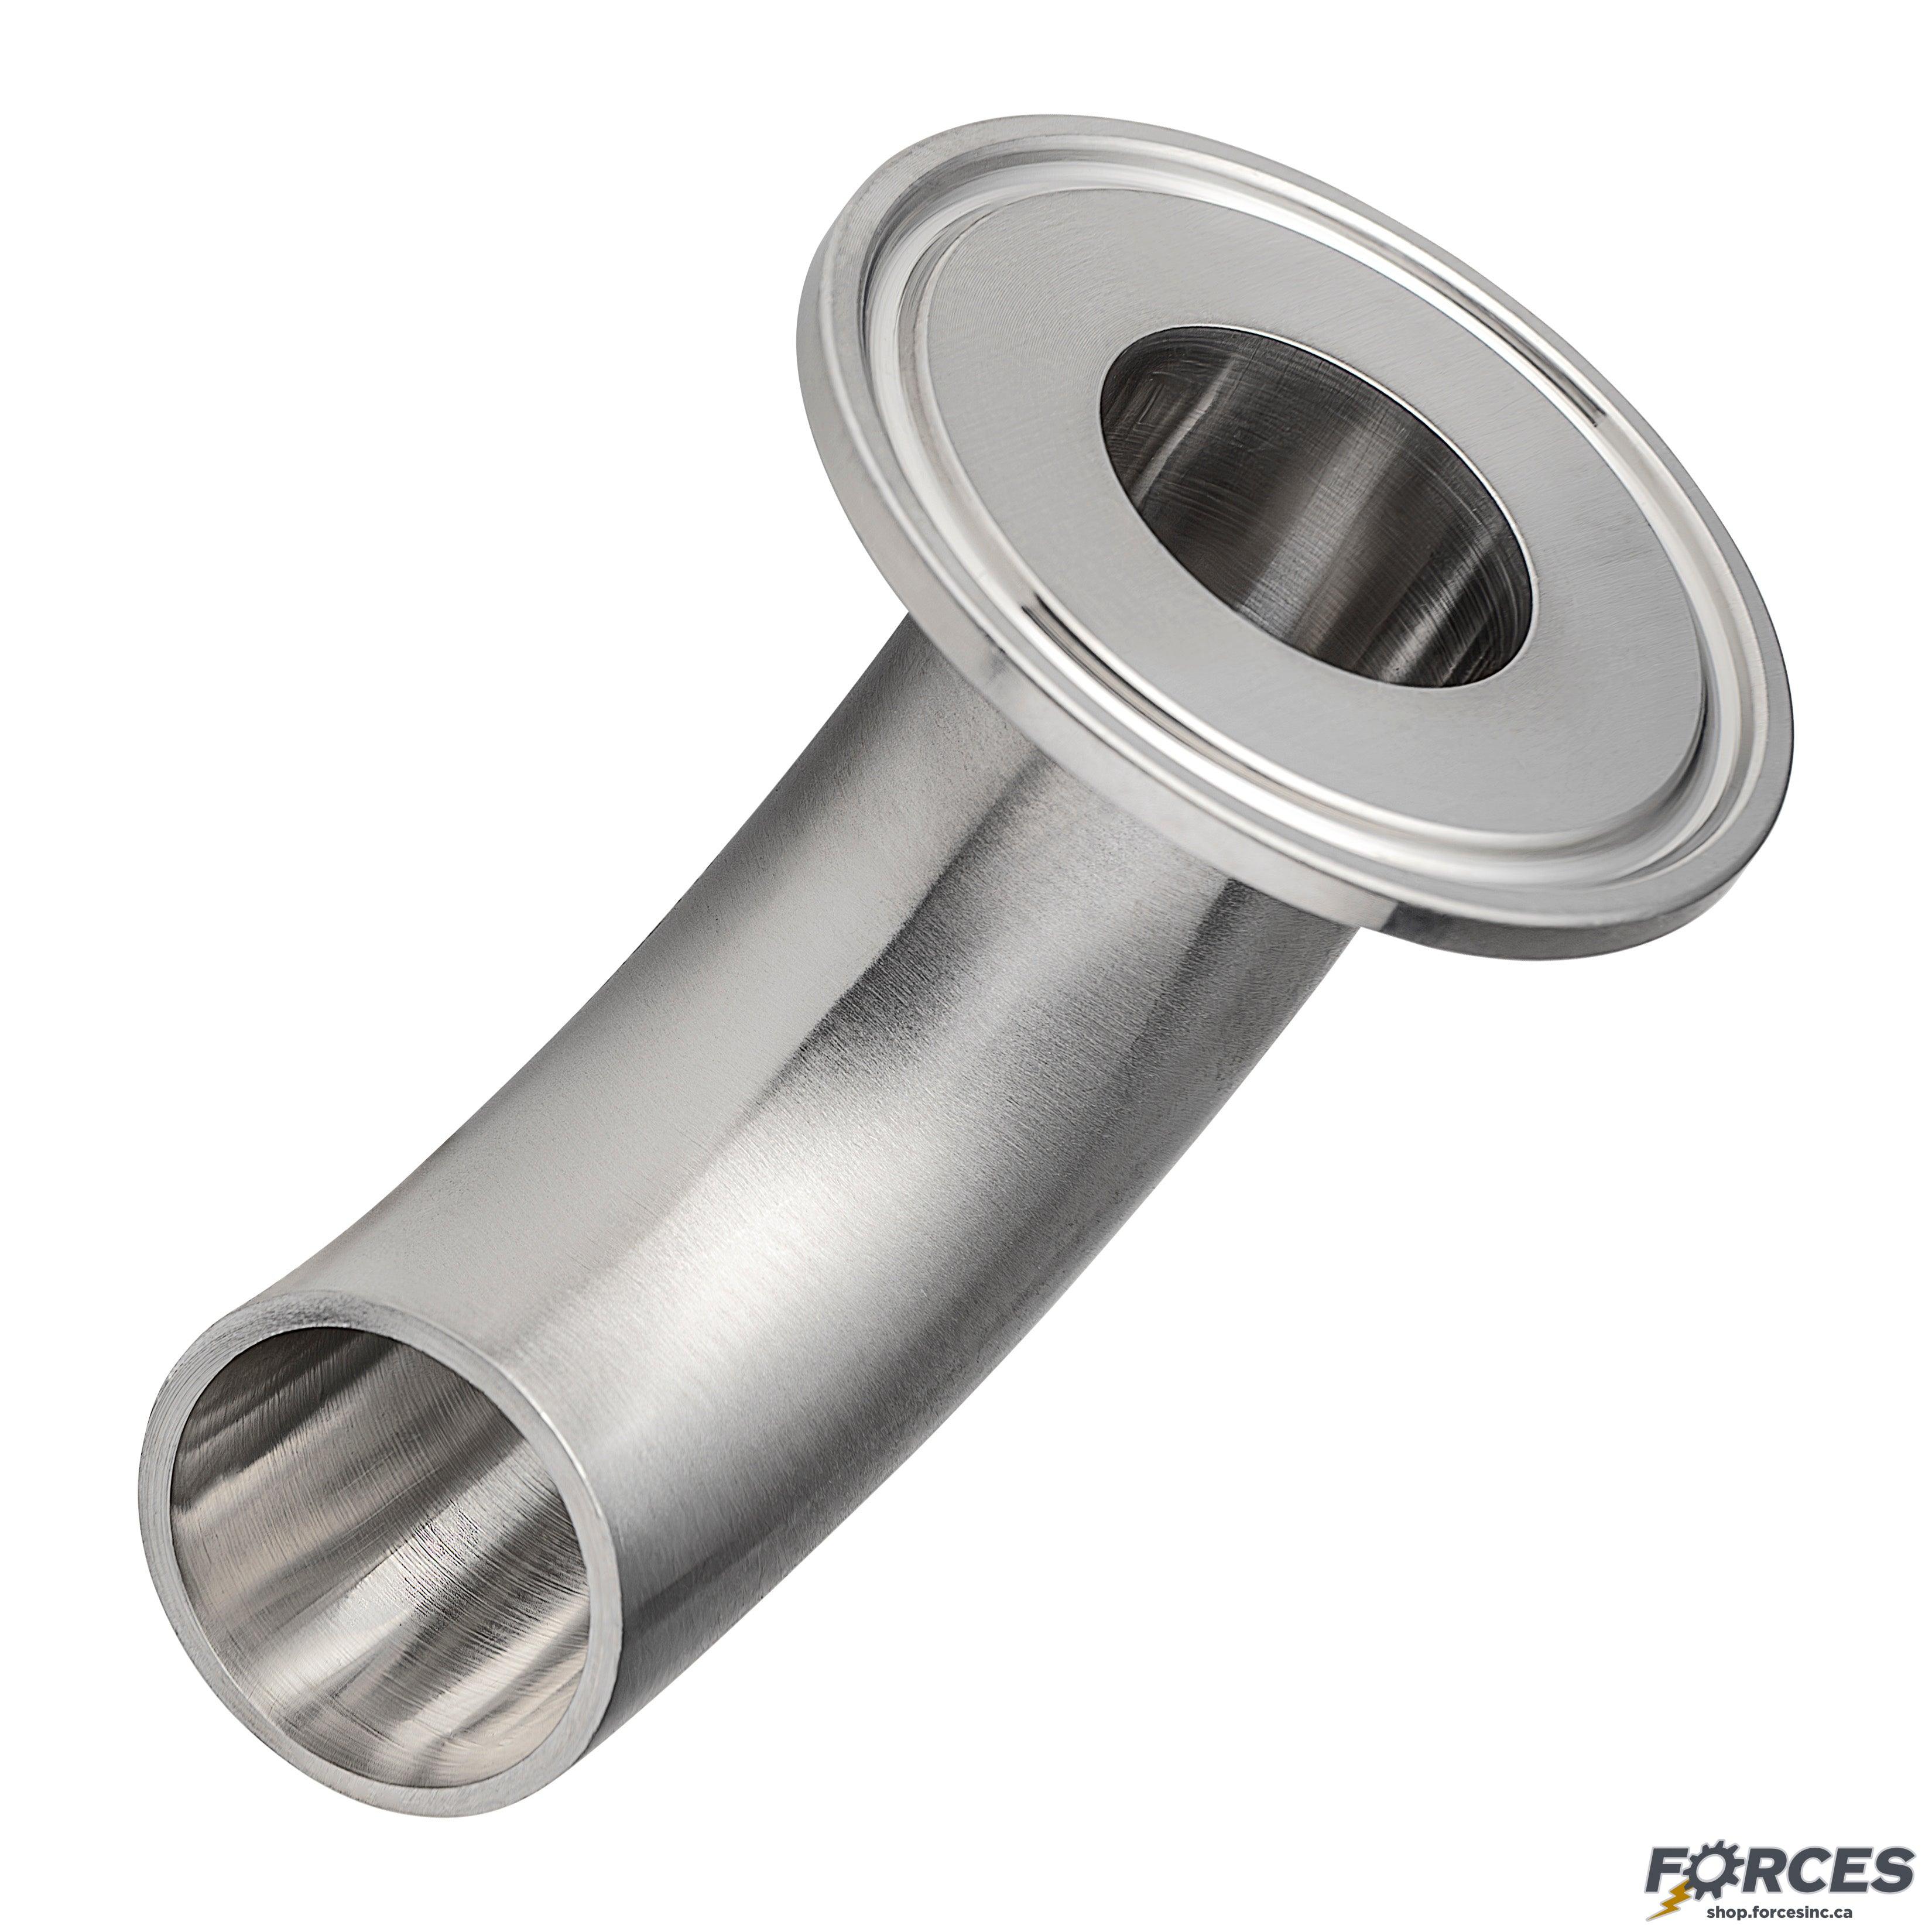 4" 90° Elbow Tri-Clamp x Buttweld - Stainless Steel 316 - Forces Inc